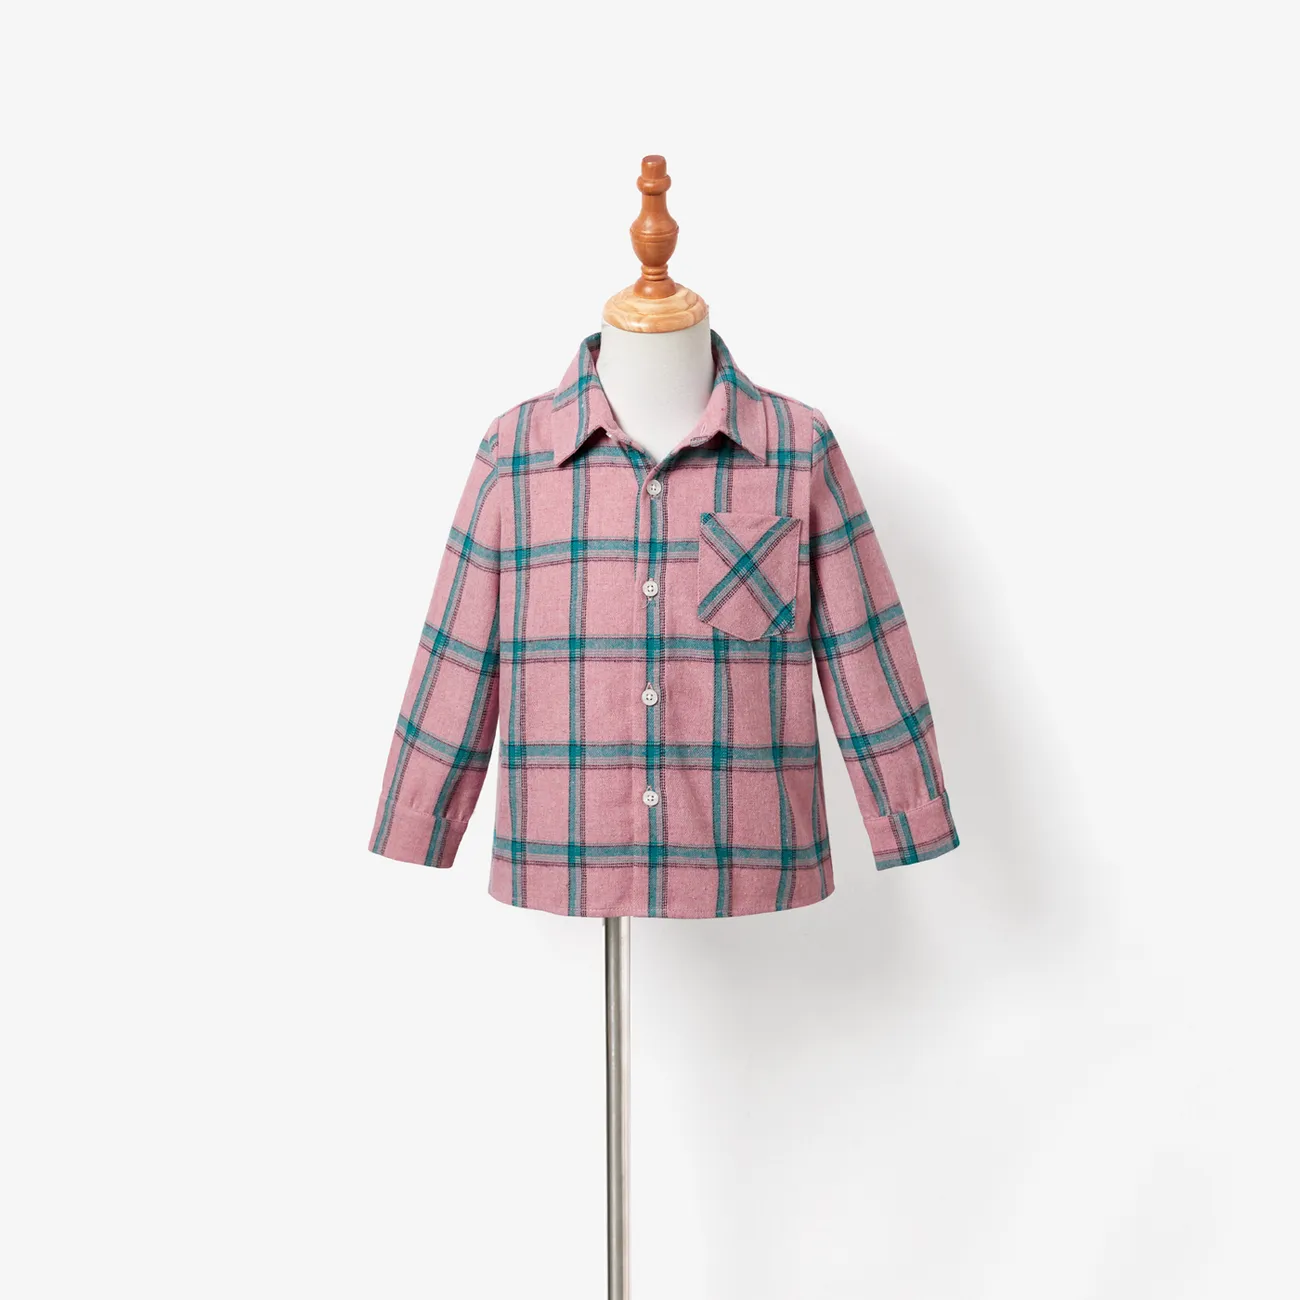 Family Matching Pink Long Sleeve Plaid Shirts Tops and Belted Mesh Dresses Sets Pink big image 1